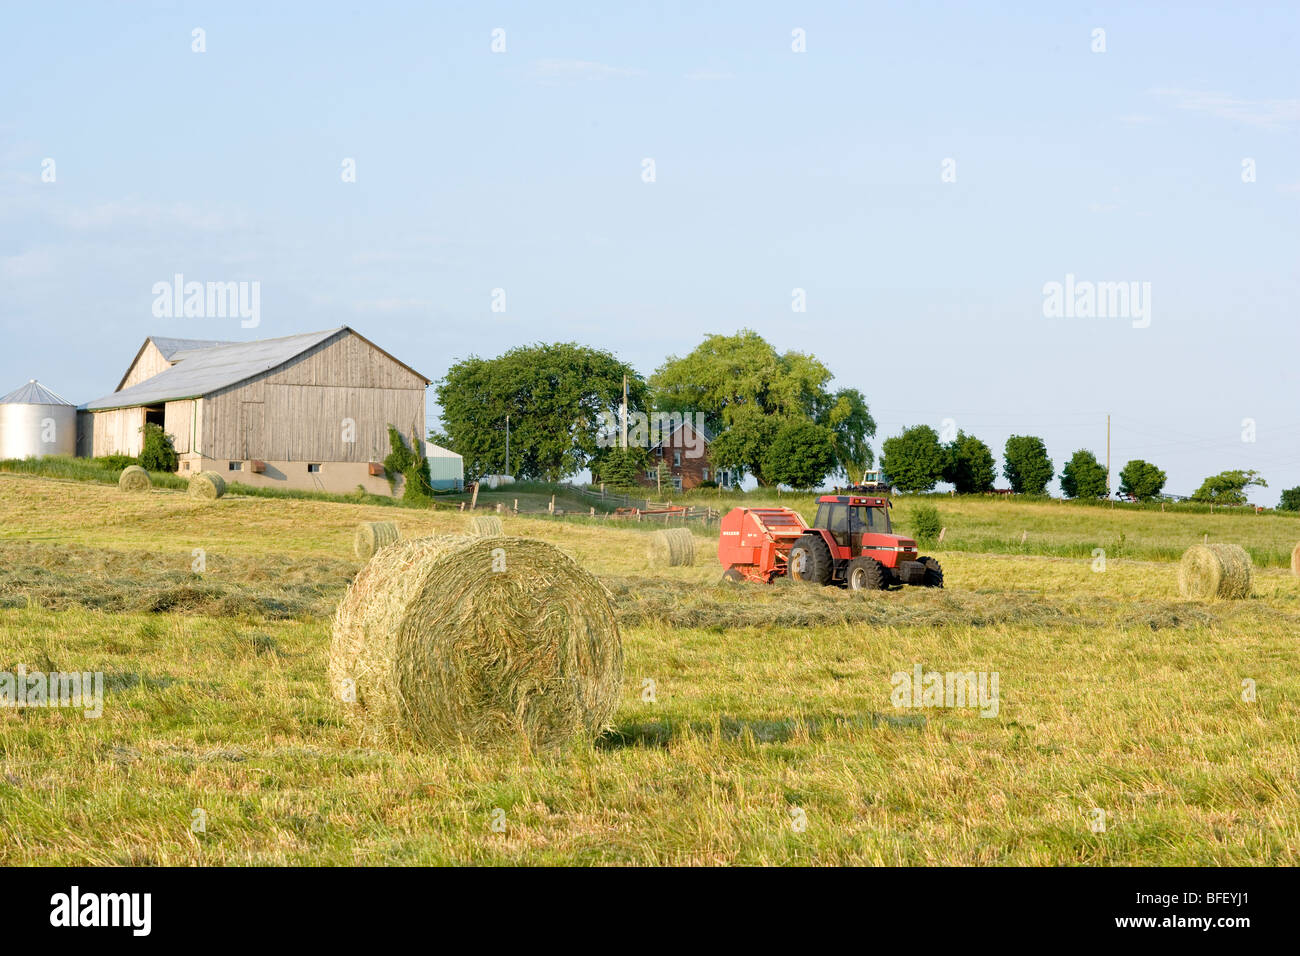 Tractor bailing hay, Aberfoyle, Ontario, Canada, agriculture Stock Photo